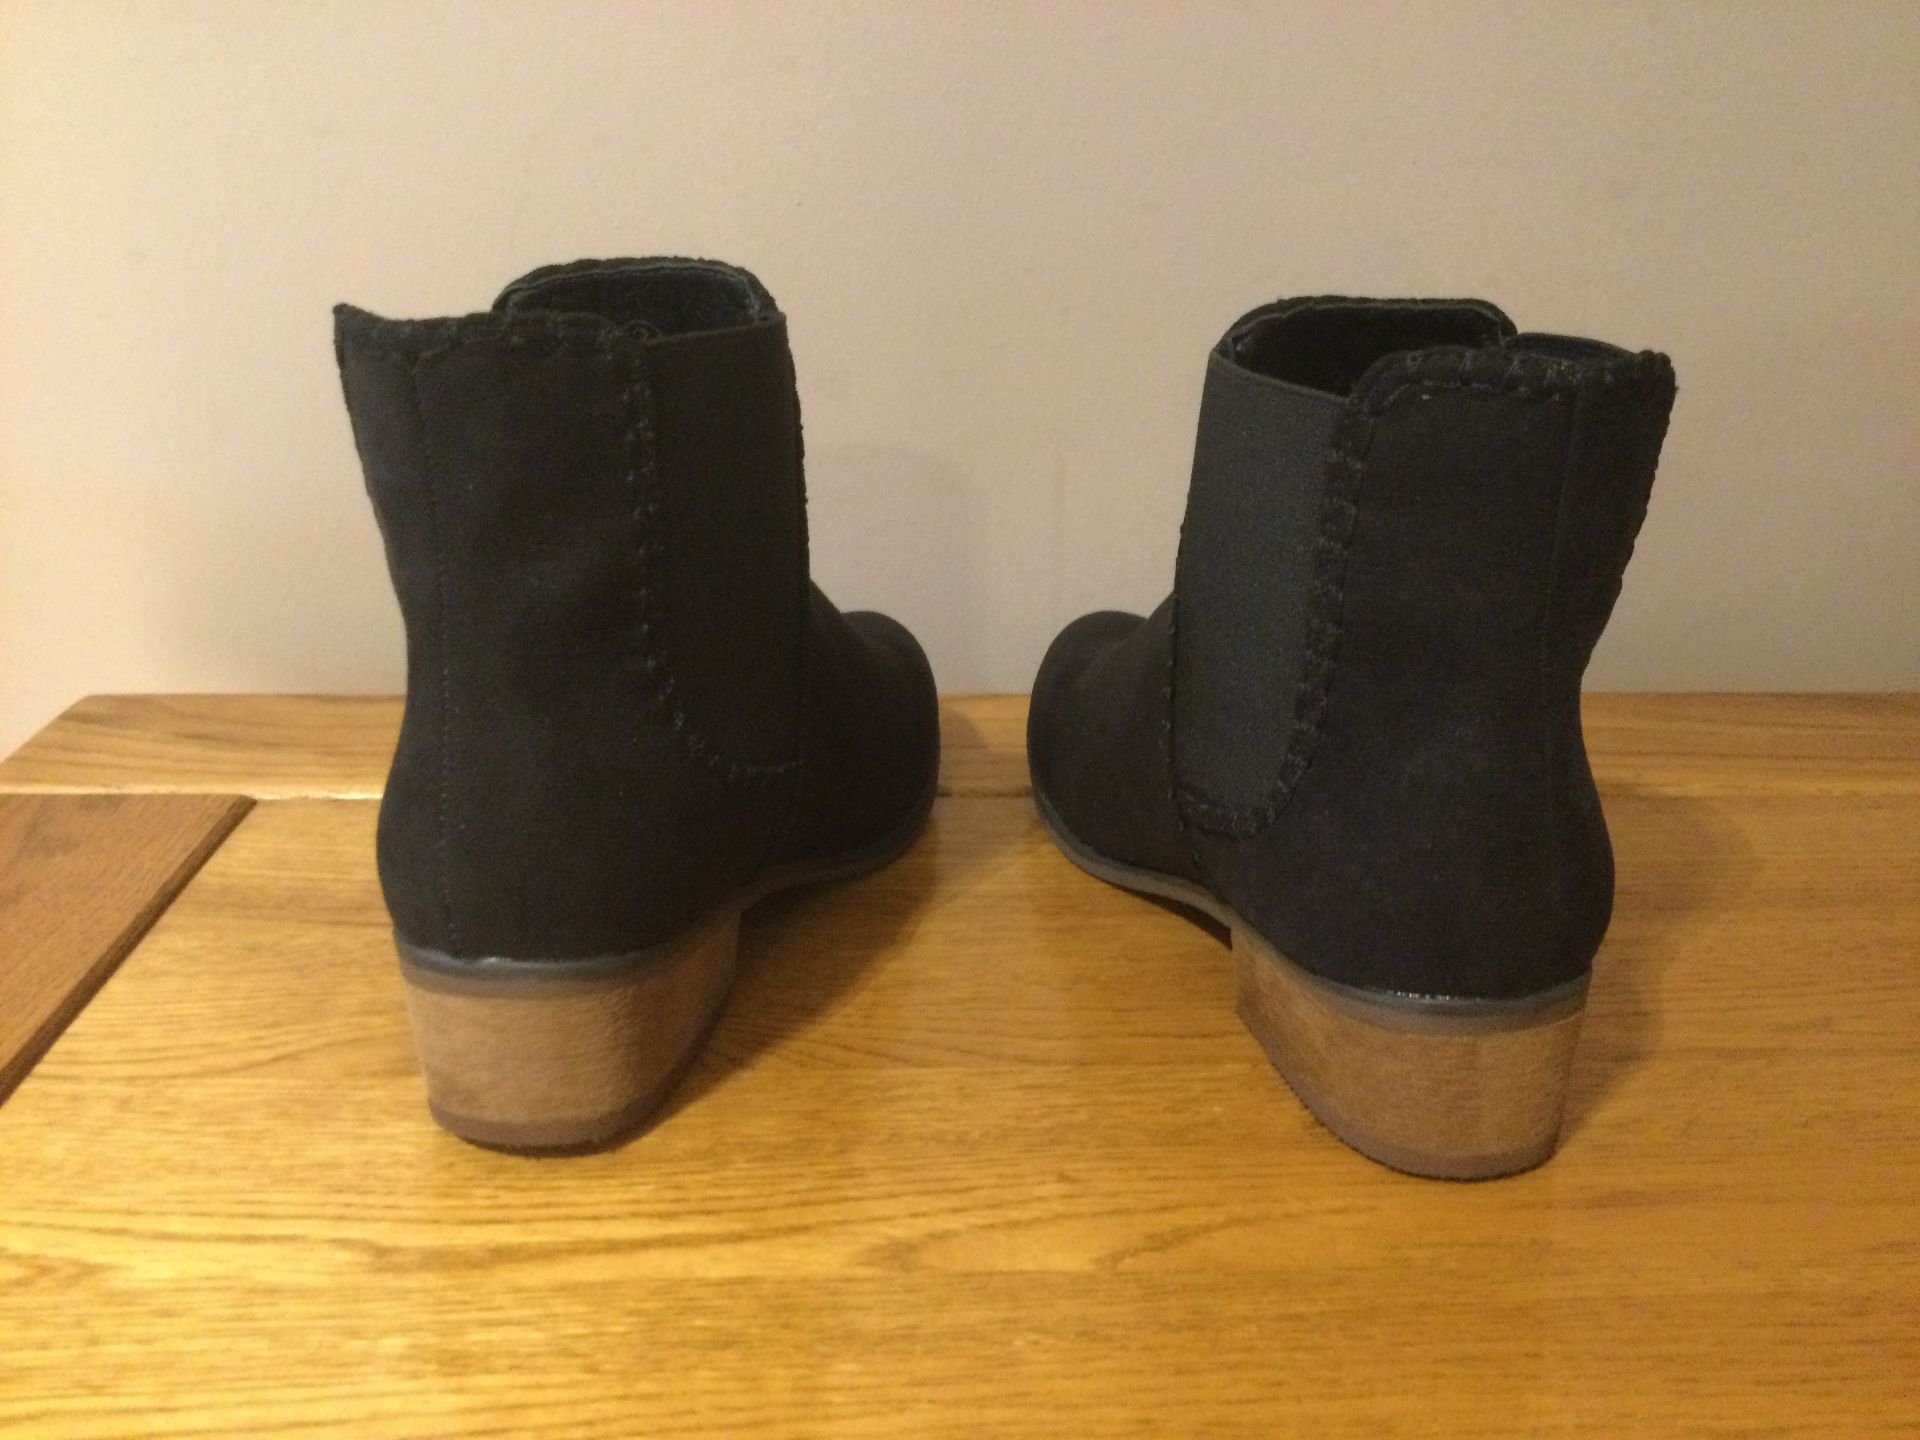 Dolcis “Pasha” Low Heel Ankle Boots, Size 4, Black - New RRP £45.99 - Image 4 of 6